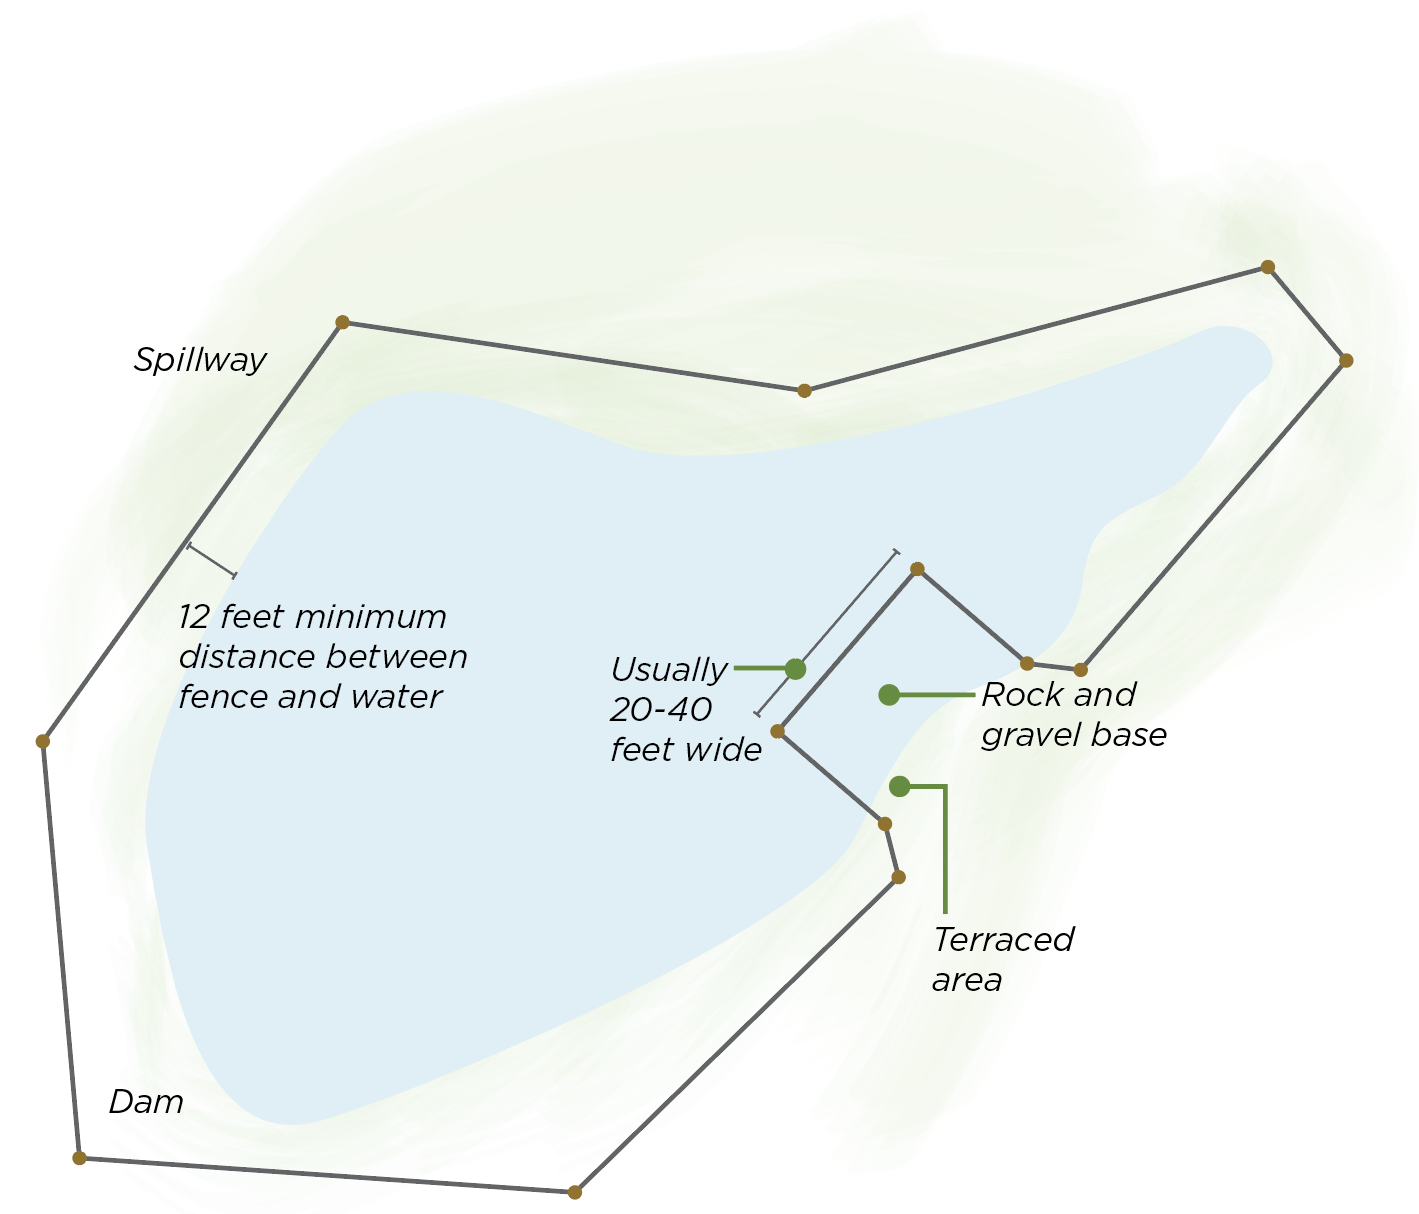 Map showing good pond guidelines for attracting ducks to your pond.